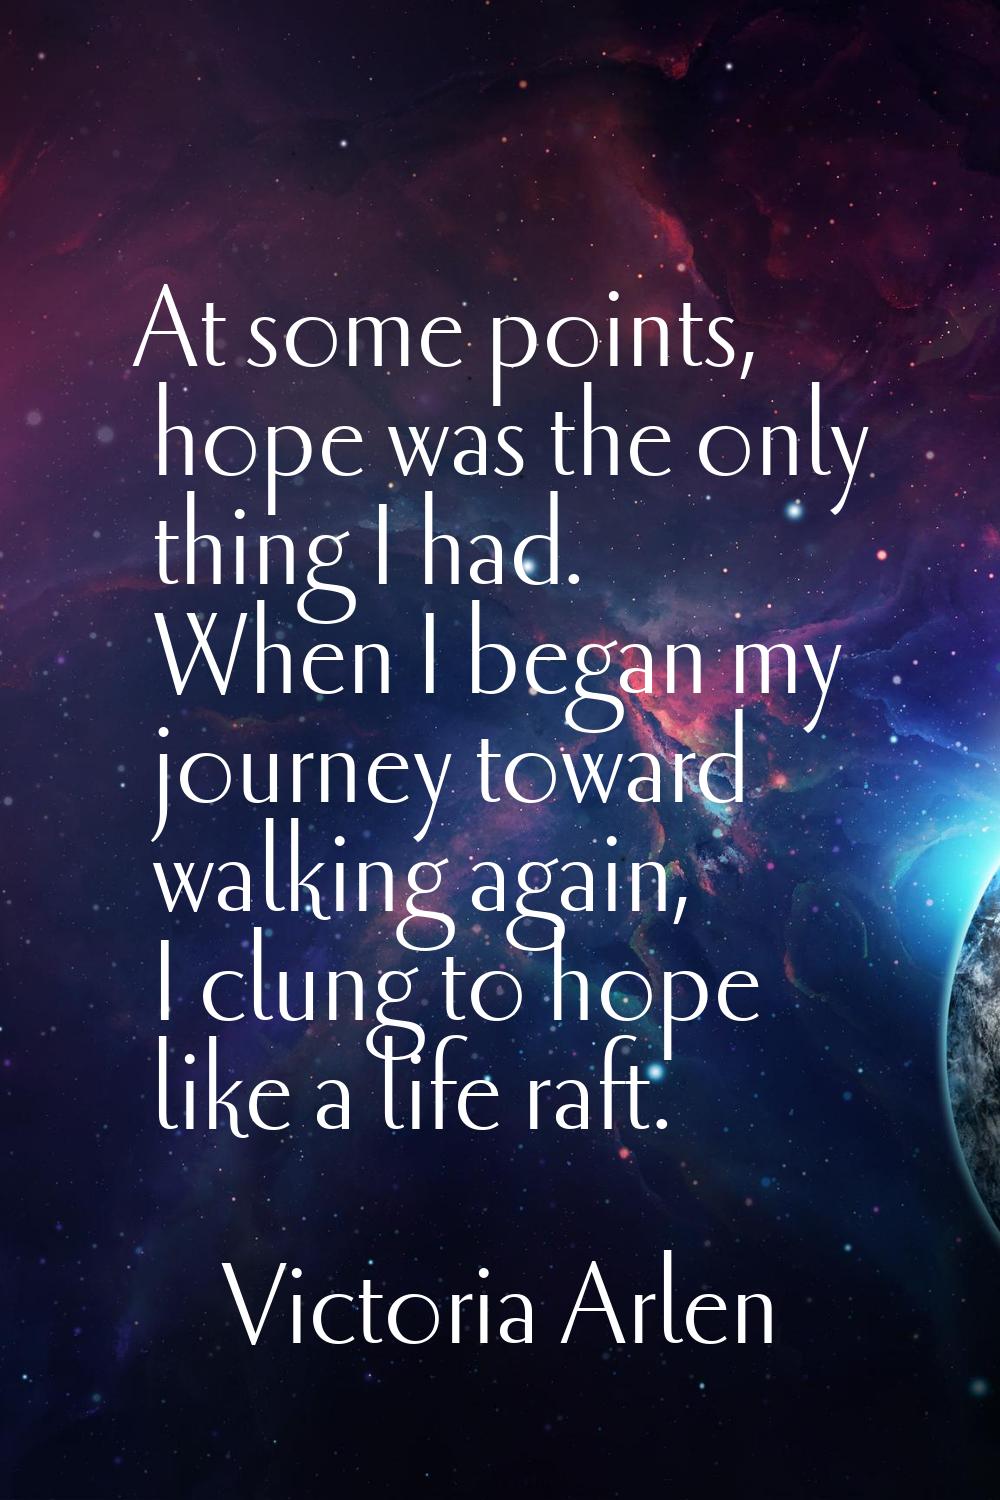 At some points, hope was the only thing I had. When I began my journey toward walking again, I clun